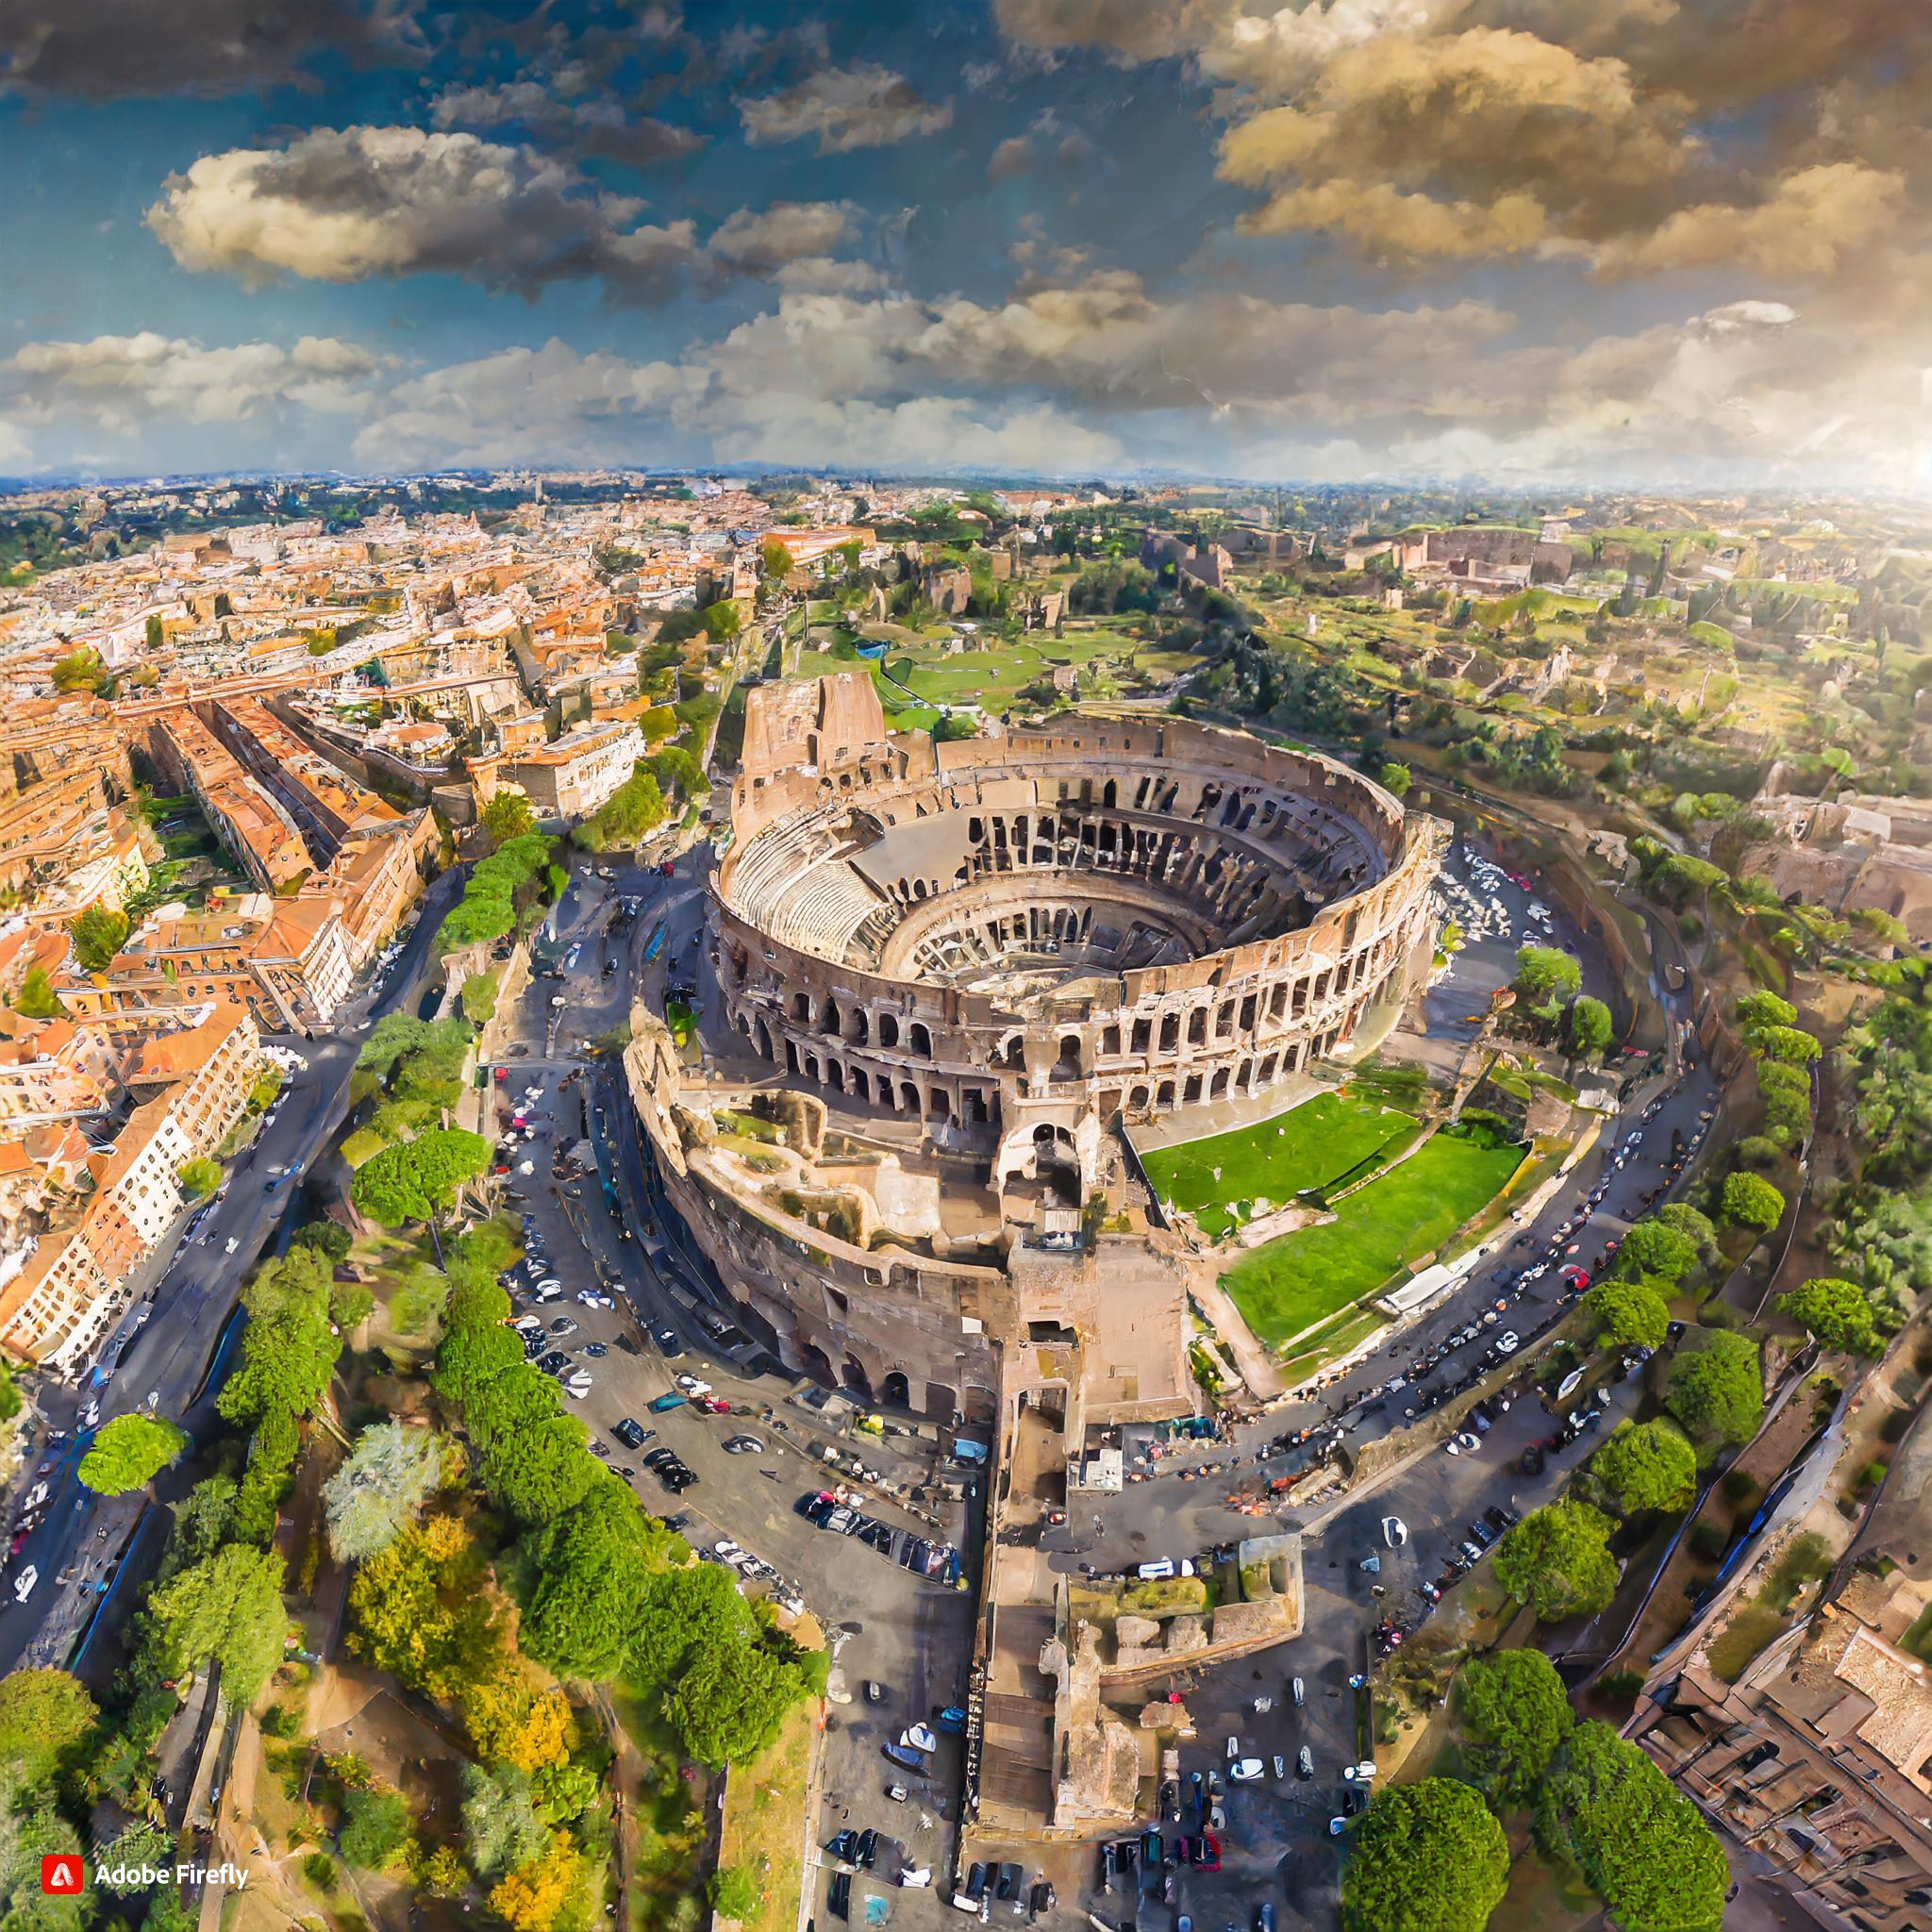  Firefly colosseum in rome, top down view 10637